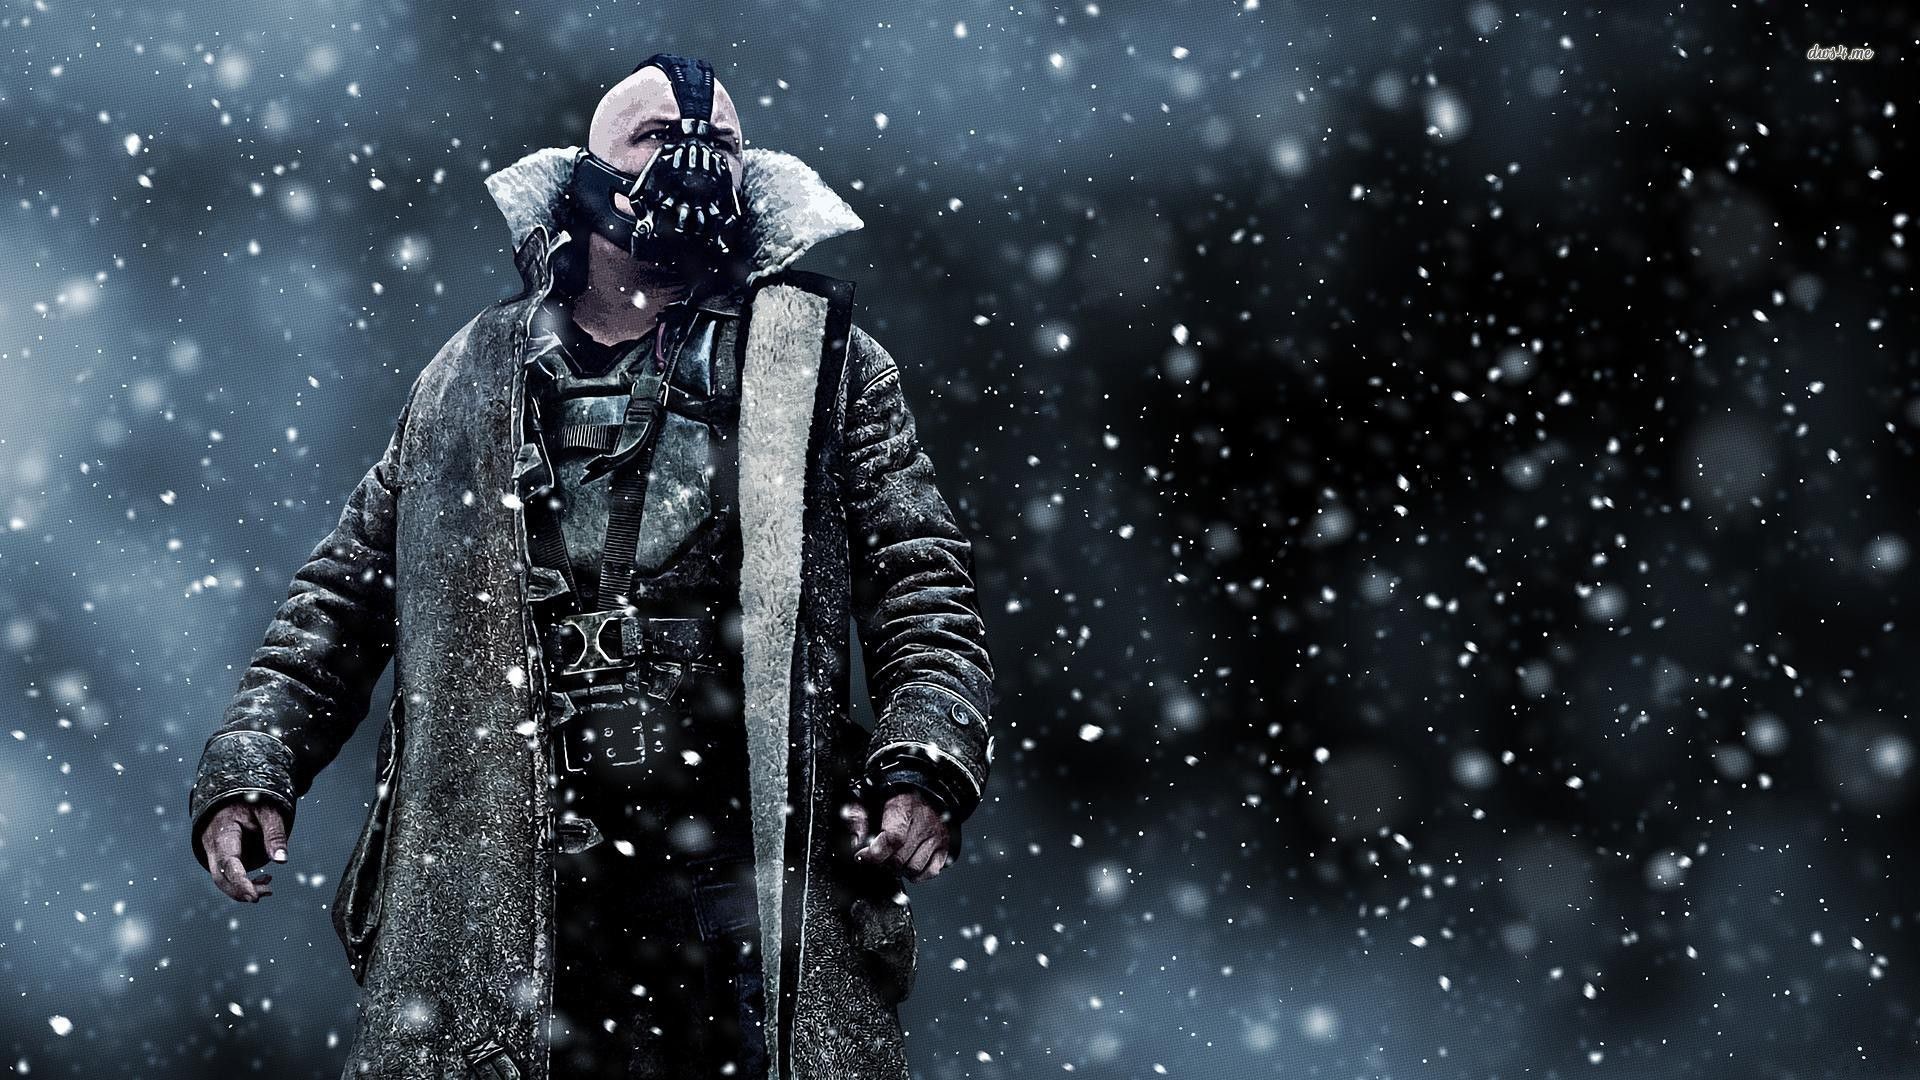 1920x1080 Search Results for “bane dark knight rises wallpaper” – Adorable Wallpapers